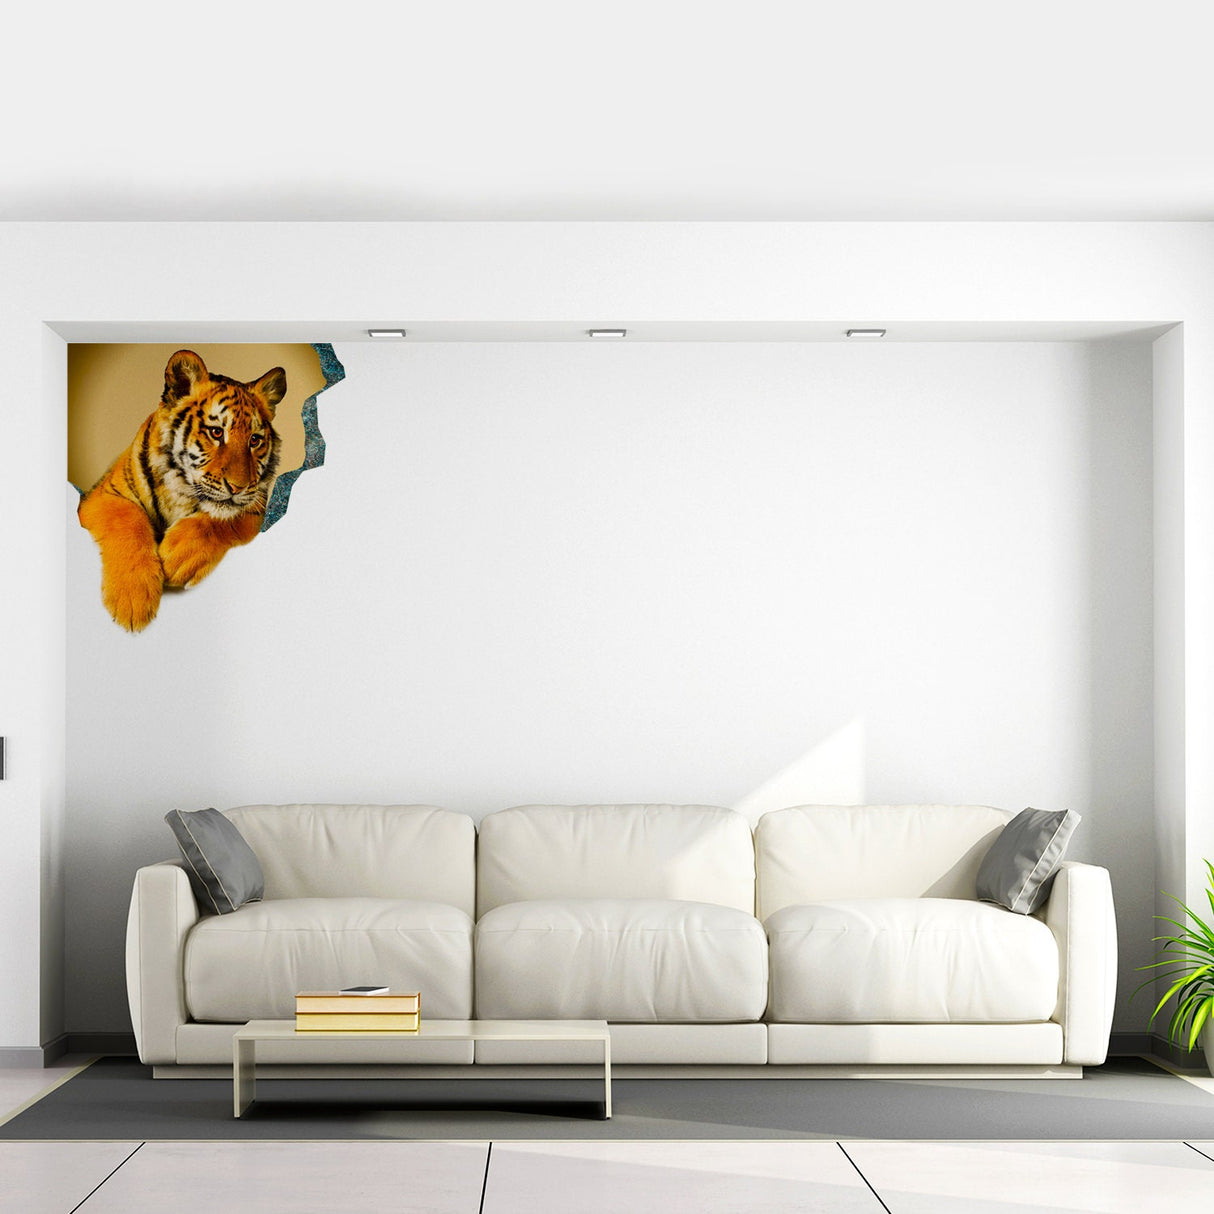 3d Tiger Sticker - Tiger Porthole Decoration Wall Decal For Bedroom